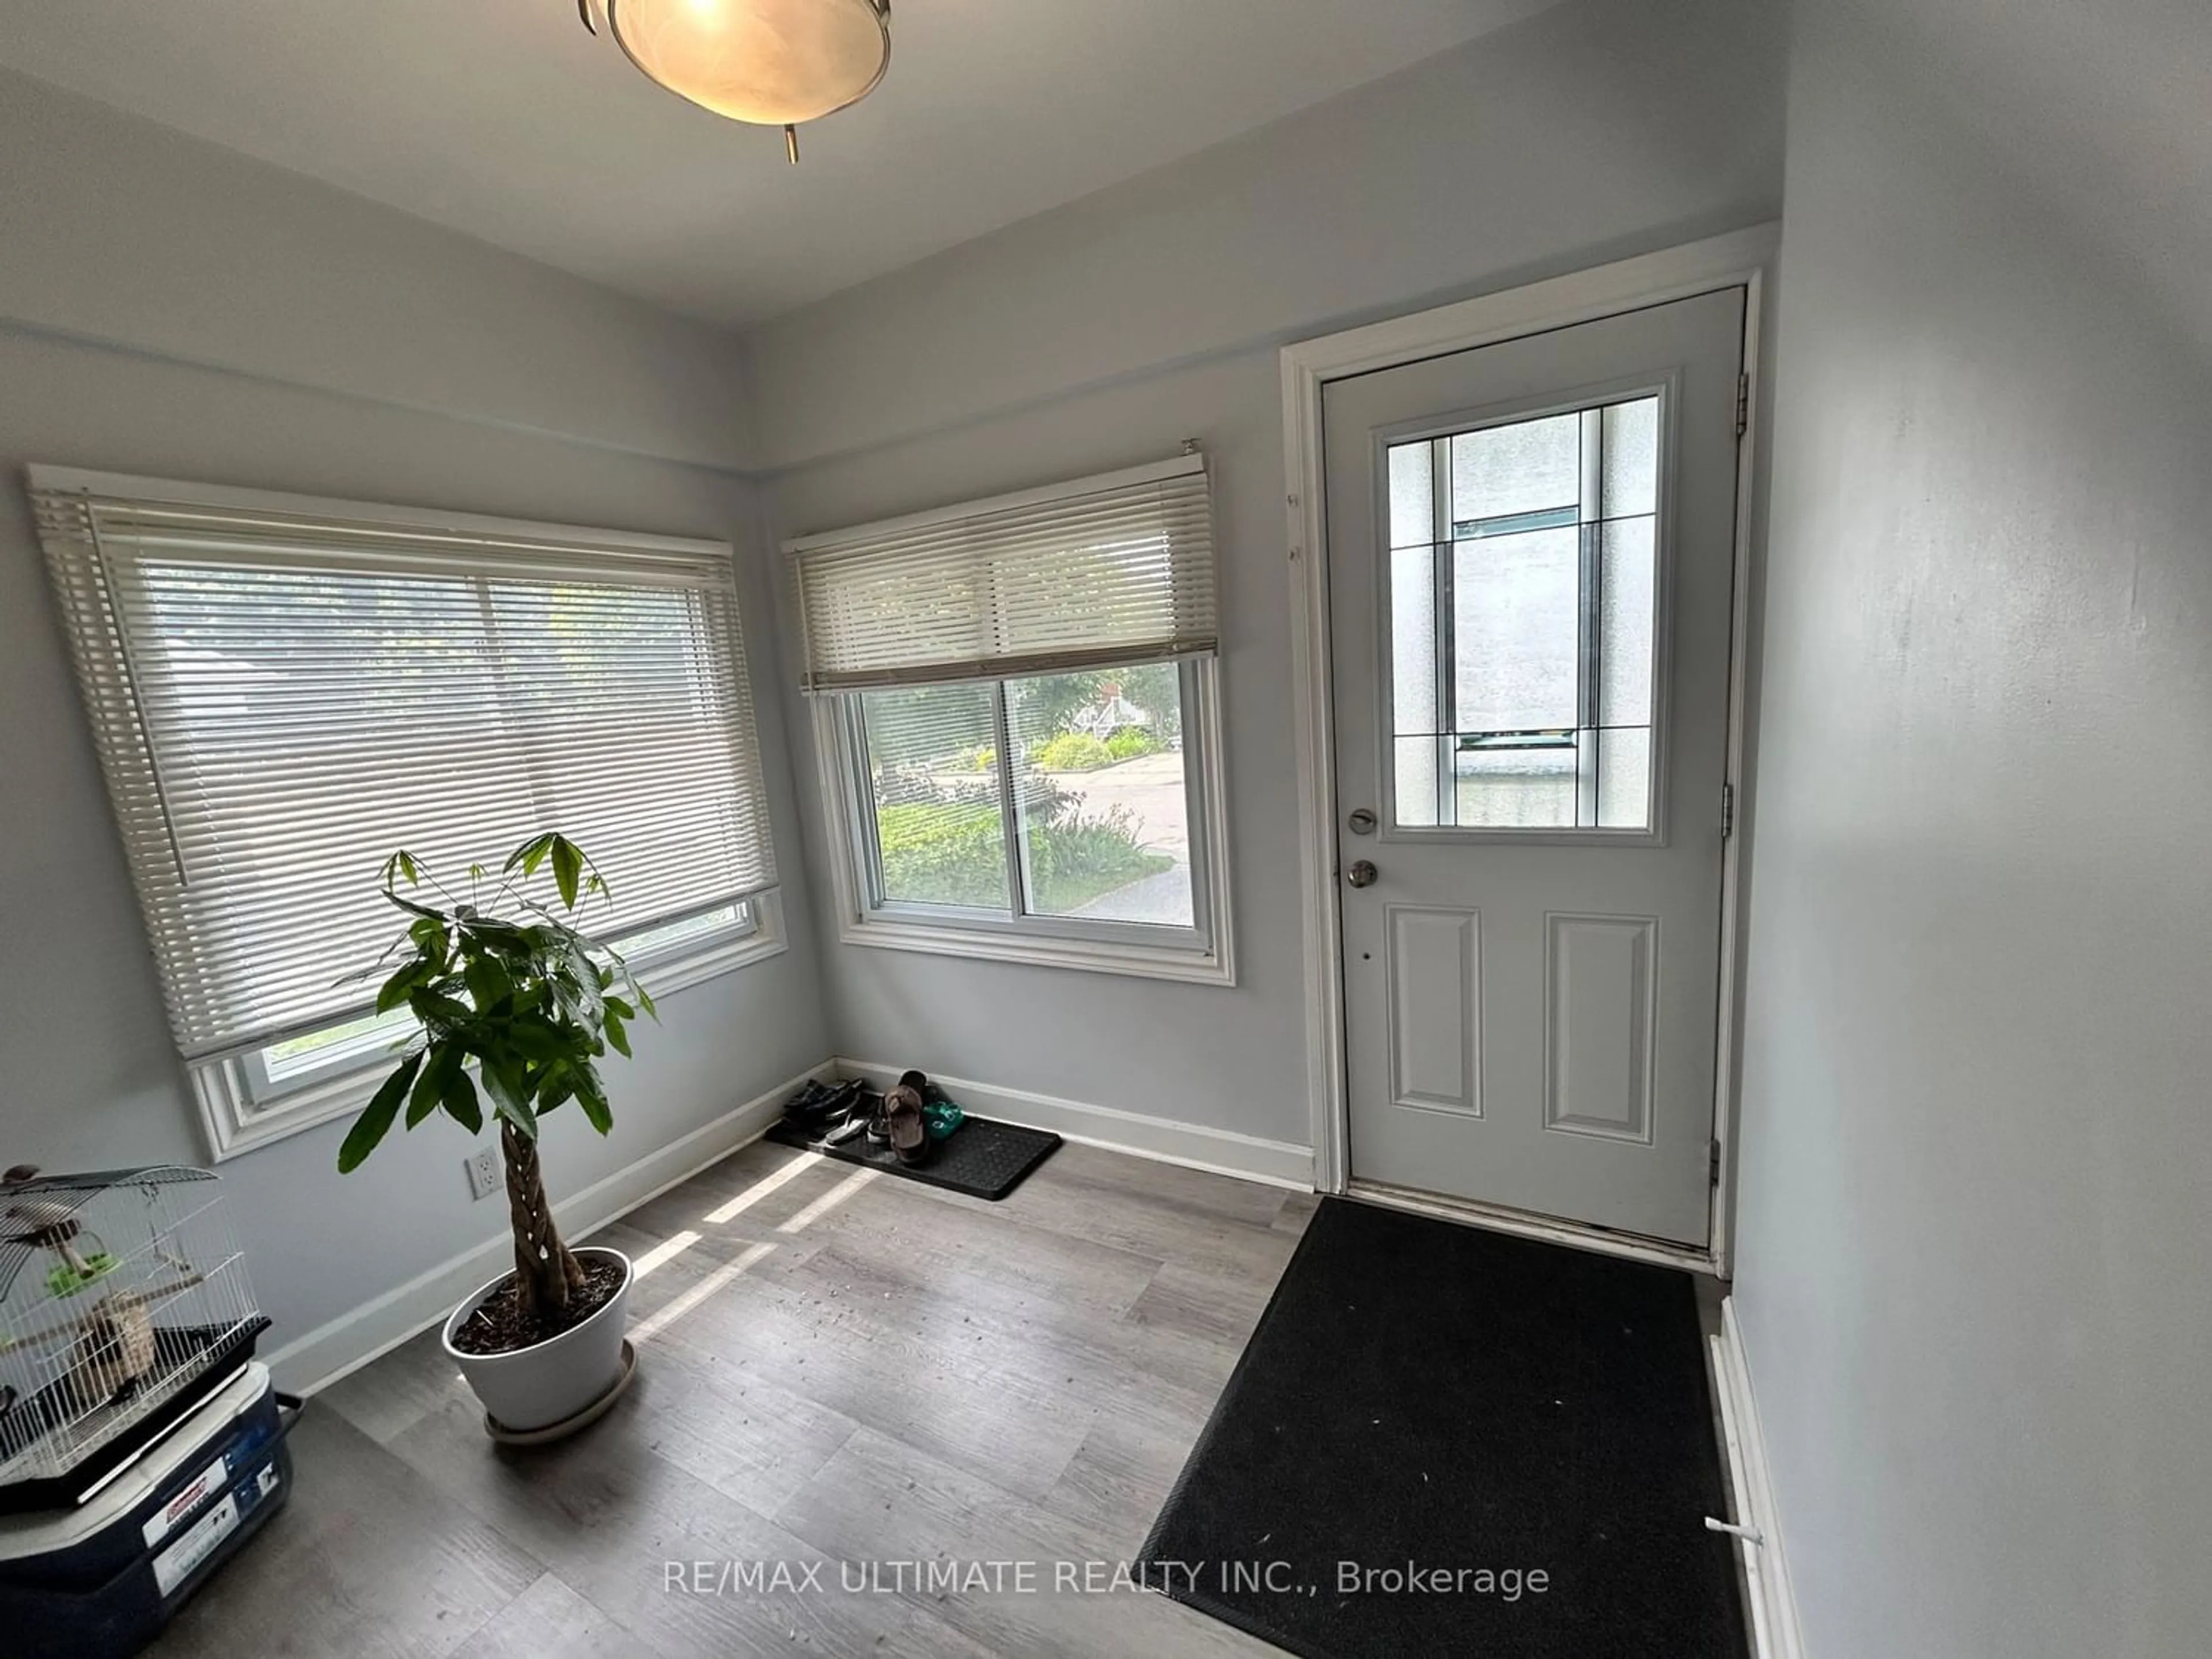 Indoor entryway for 51 Mould Ave, Toronto Ontario M6N 3Z8